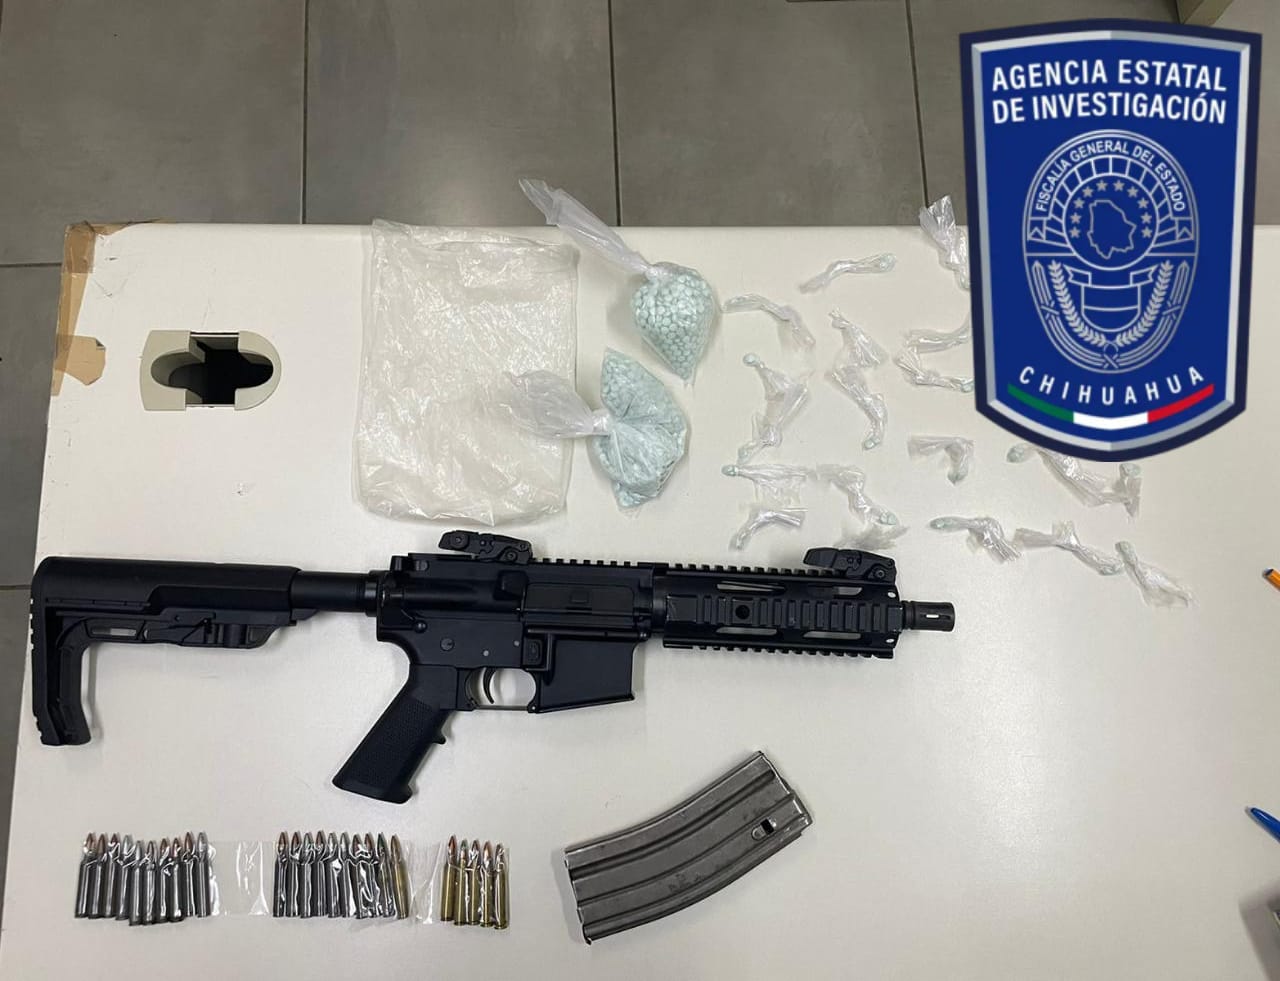 The Shakira carried doses of fentanyl and a rifle (Photo: Chihuahua Prosecutor's Office)